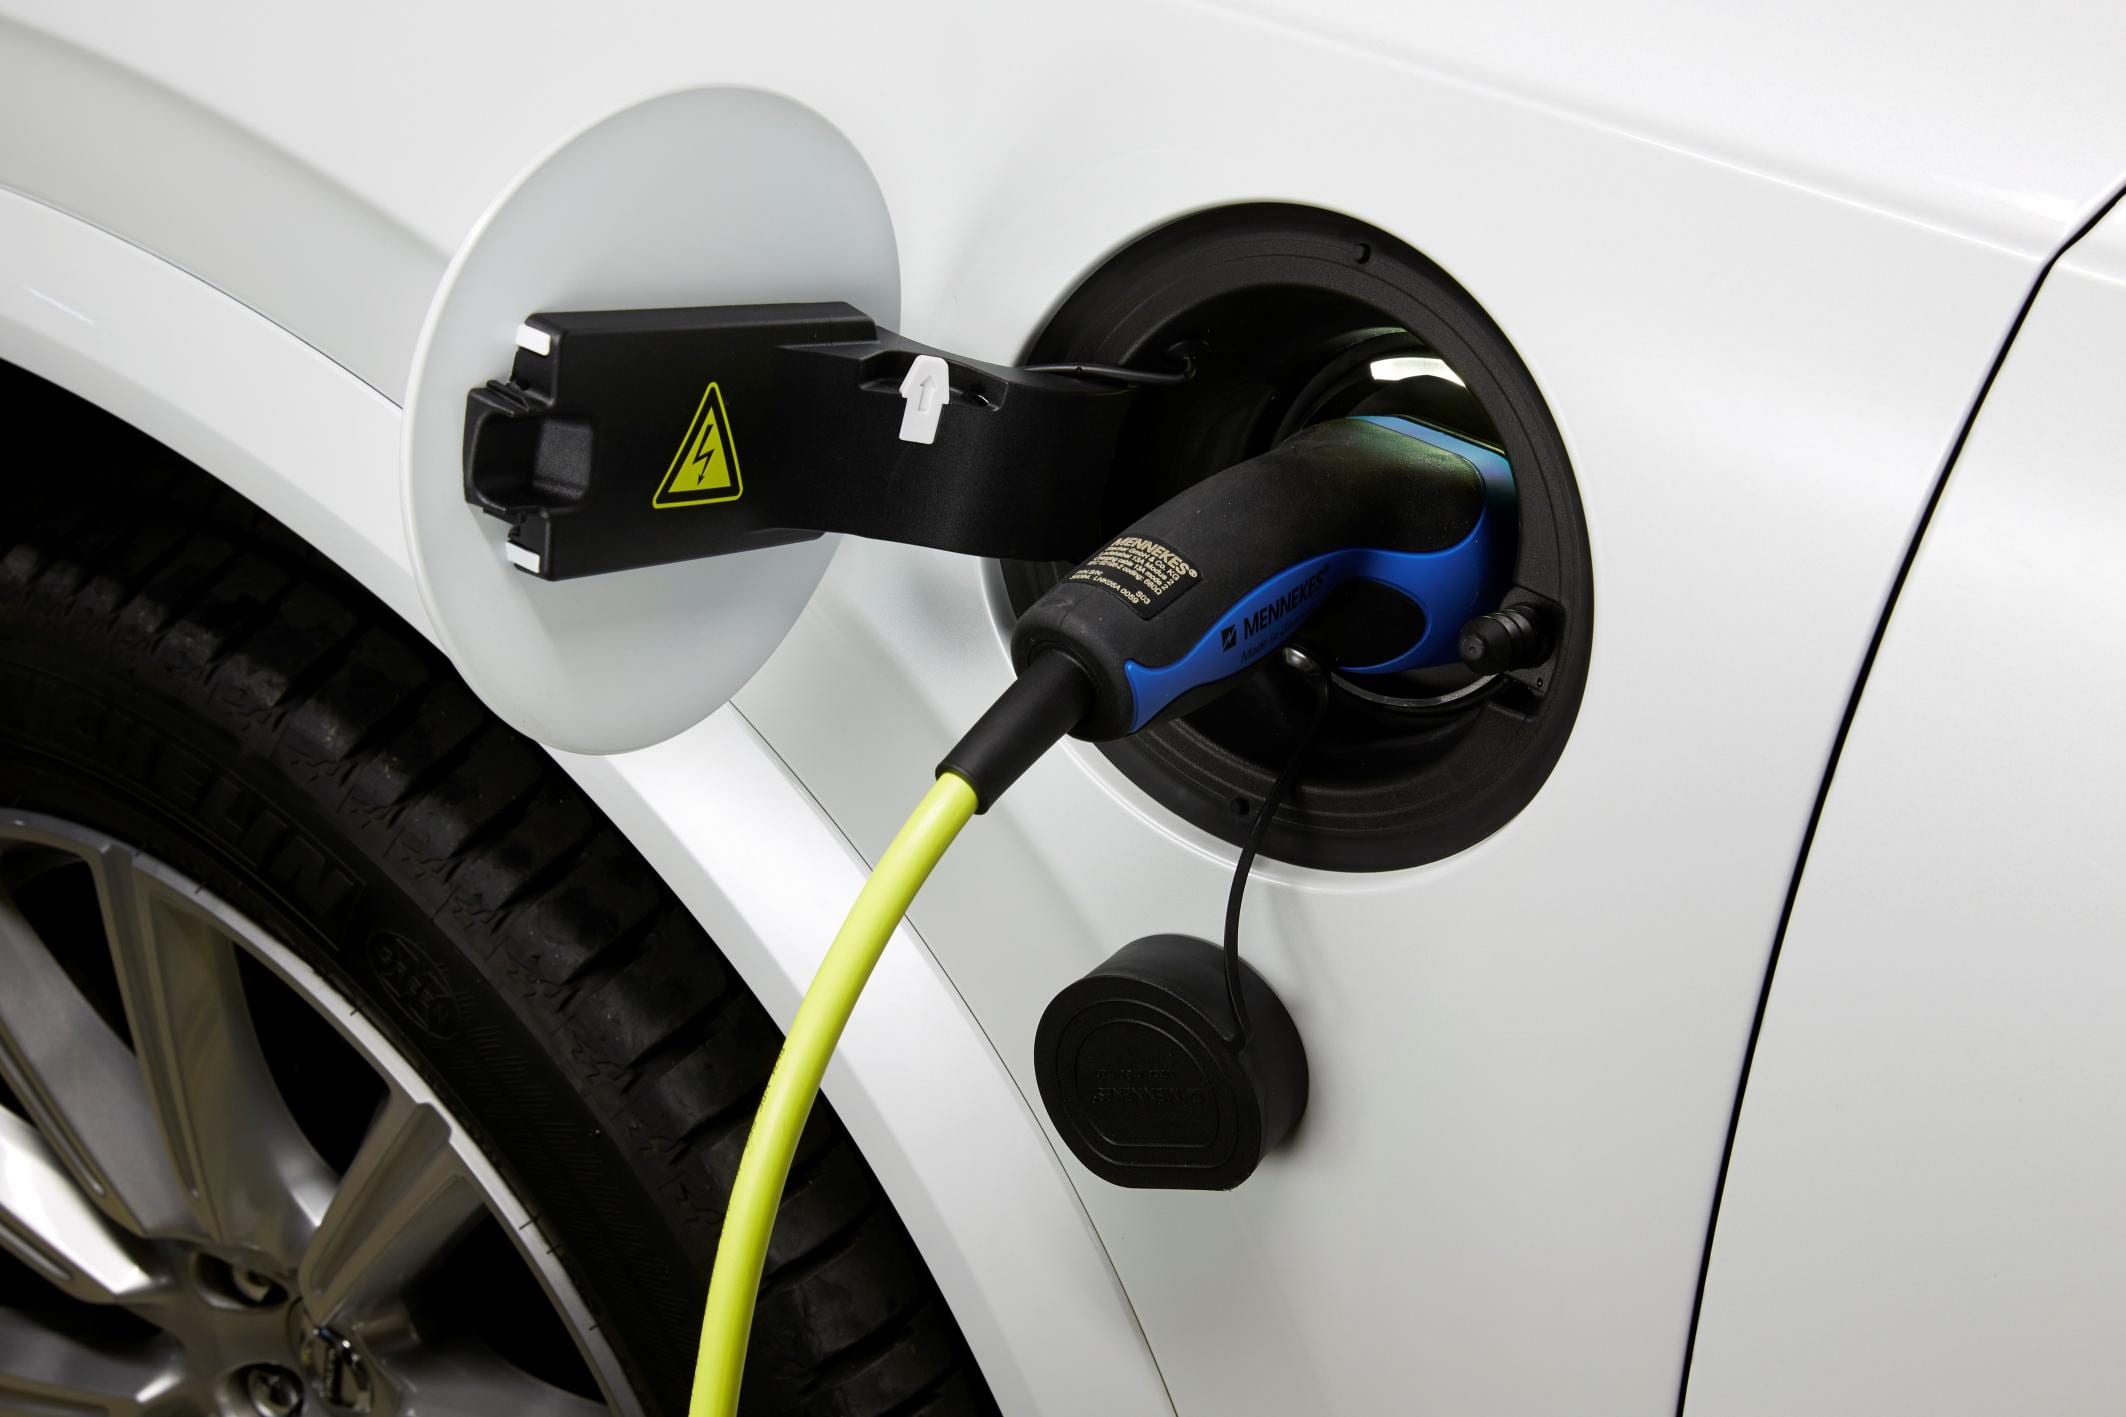 EV sales could drop amid rising energy costs